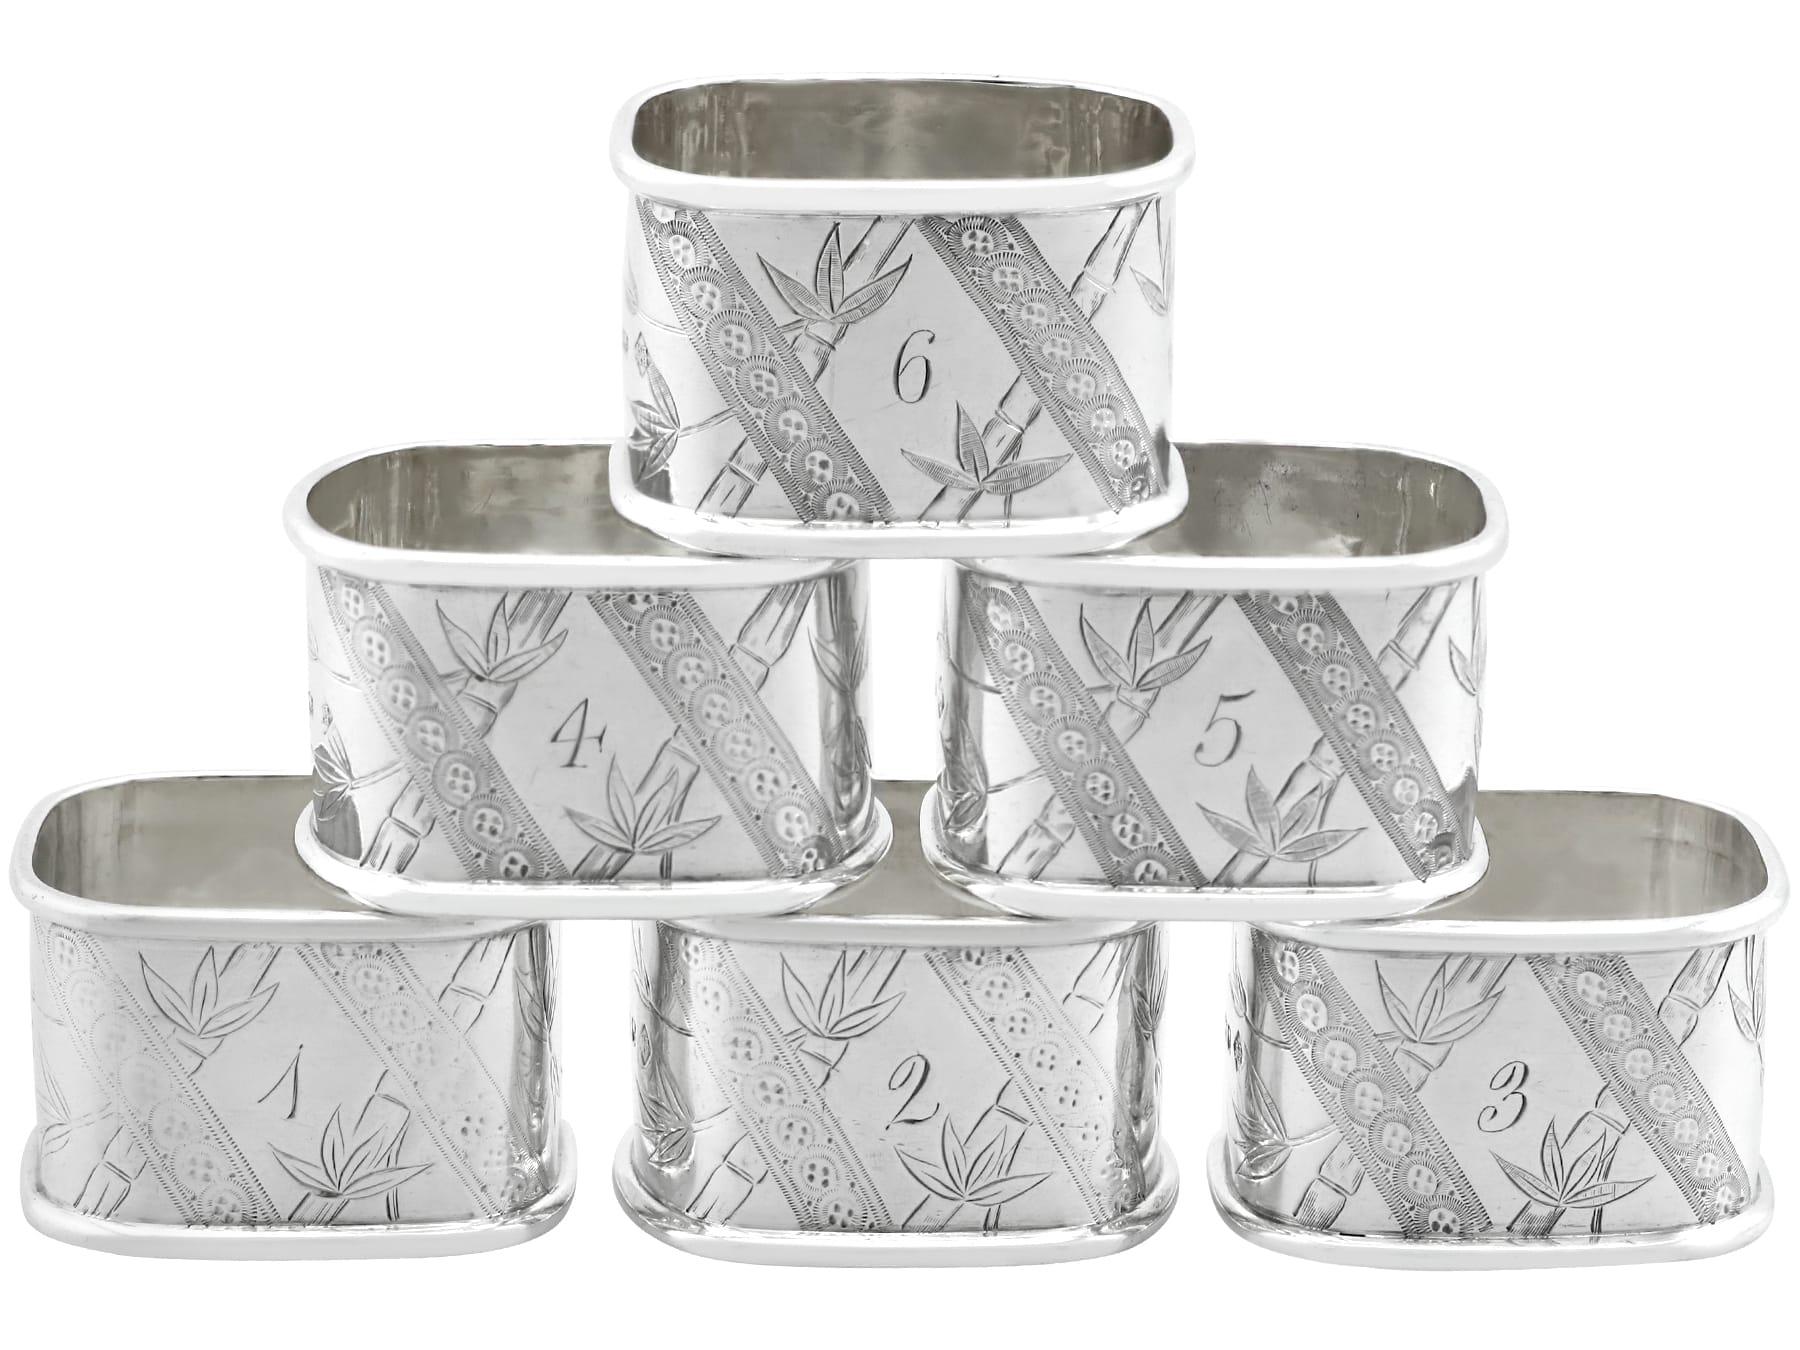 An exceptional, fine and impressive set of six individually numbered antique Victorian English sterling silver Aesthetic style napkin rings - boxed; part of our silver dining collection

This exceptional, fine and impressive set of antique